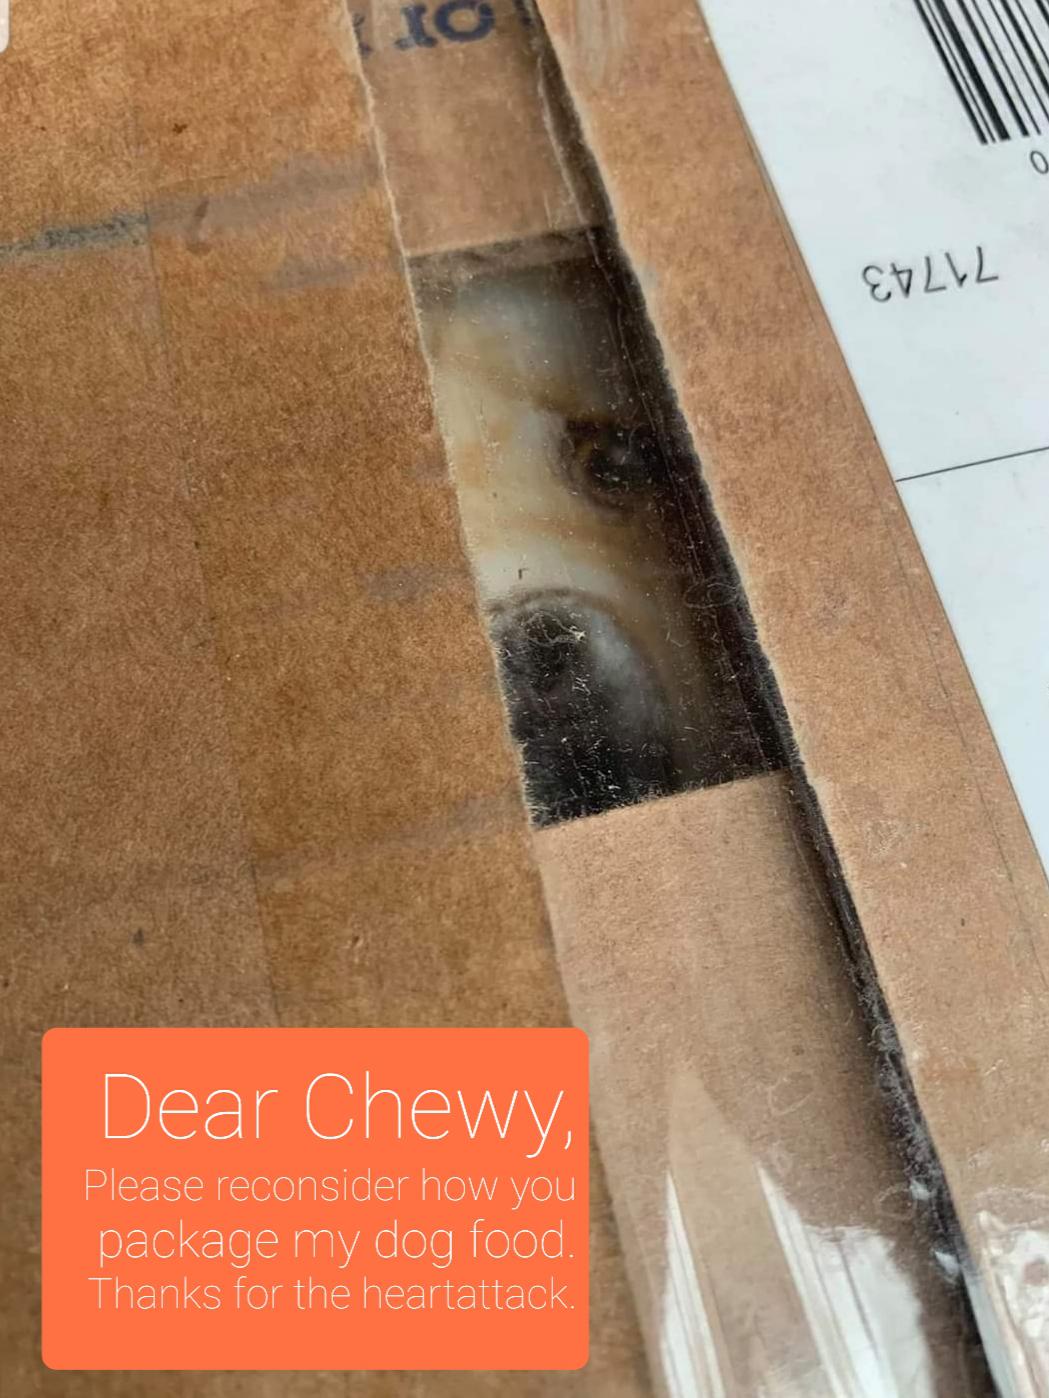 floor - Exlil Dear Chewy, Please reconsider how you package my dog food. Thanks for the heartattack.